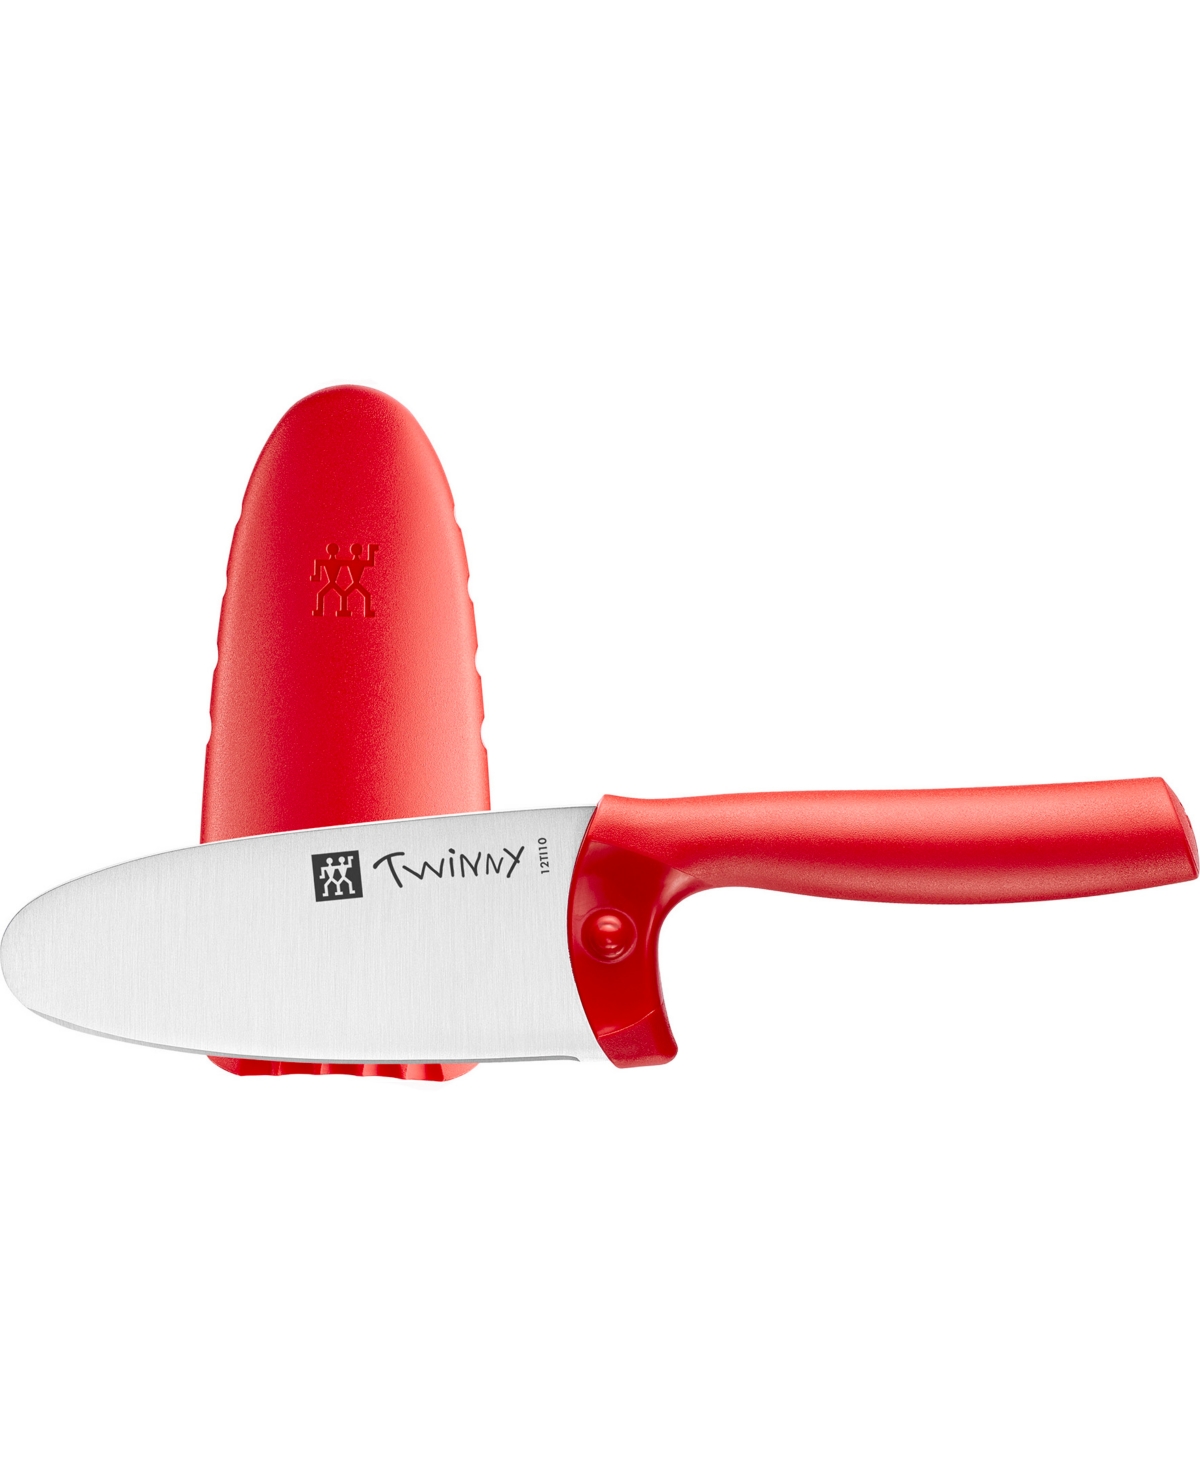 Zwilling Twinny Kids Chef's Knife In Red